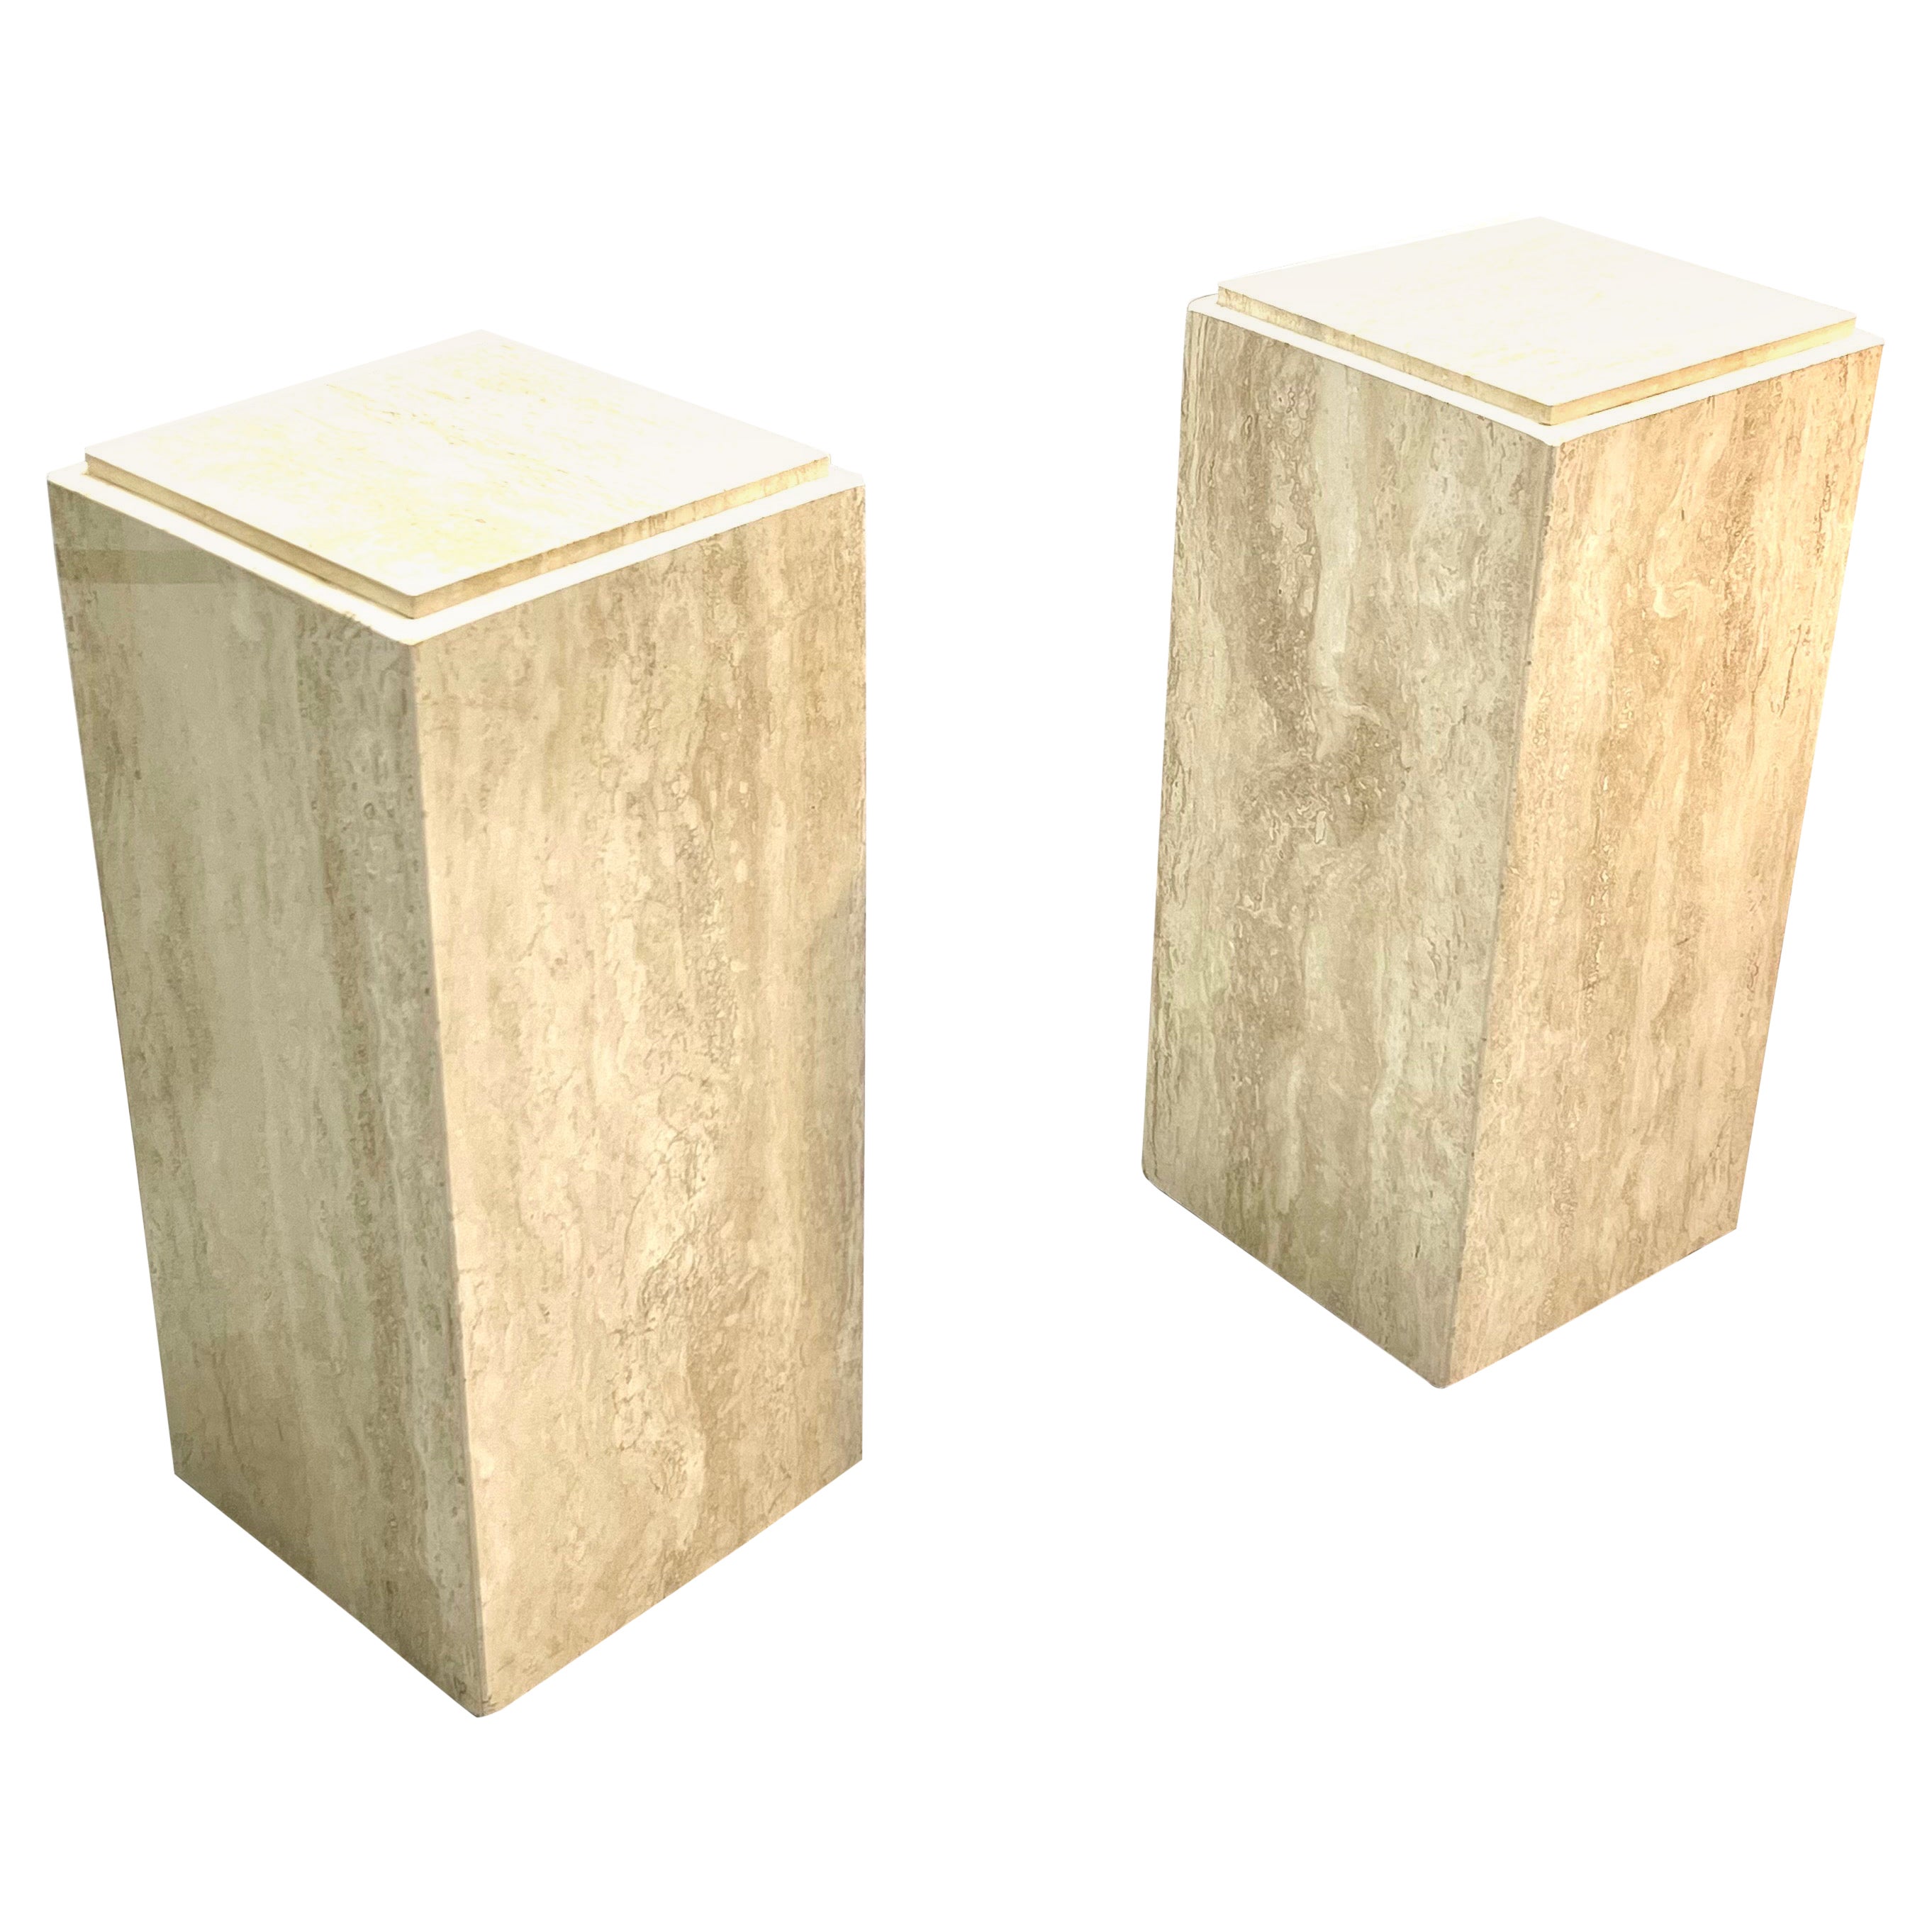 Travertine Pair of Pedestals Stands Drink Tables, 1970s For Sale